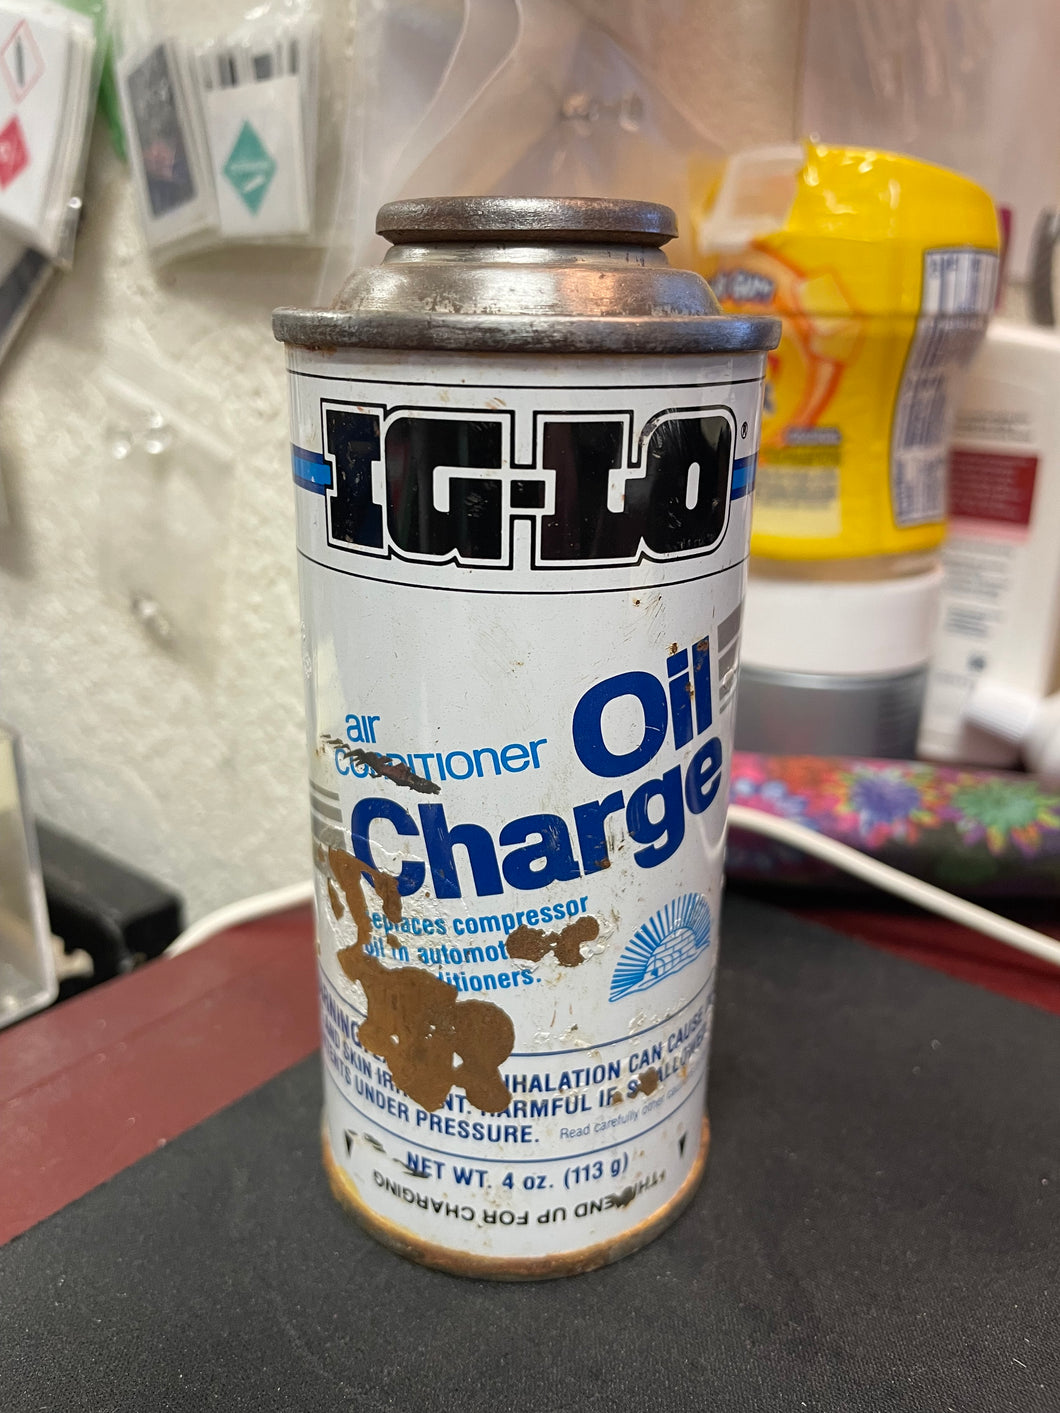 R12 Refrigerant Oil Charge, IGLOO Air Conditioner FREON 12, 4 oz. Can